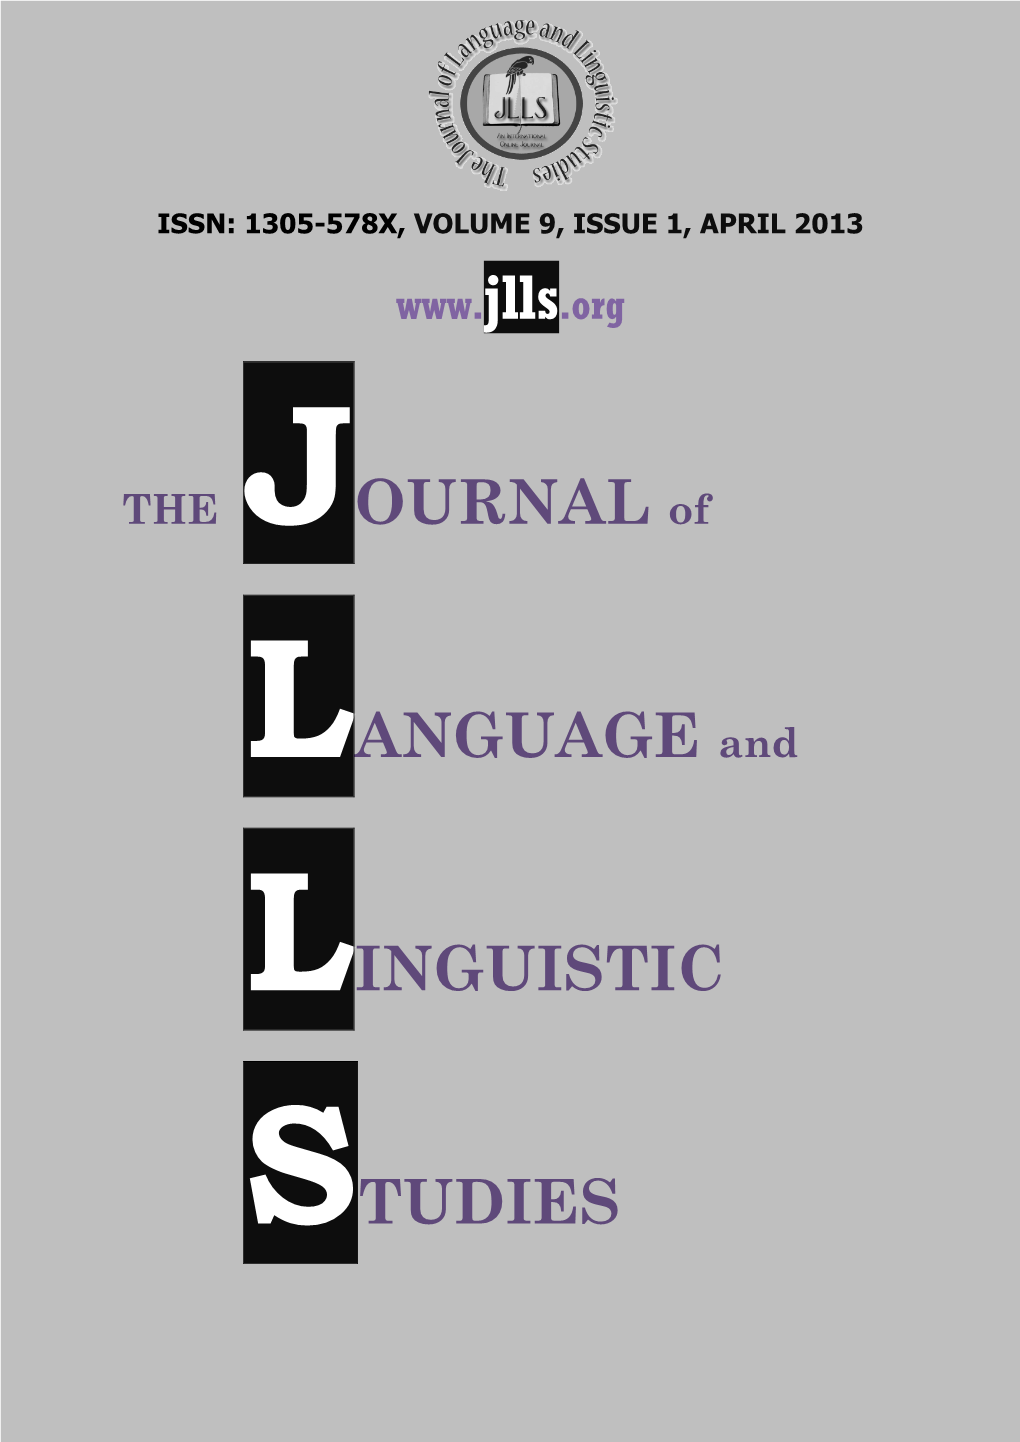 The Journal of Language and Linguistic Studies, Volume 9, Issue 1, April 2013